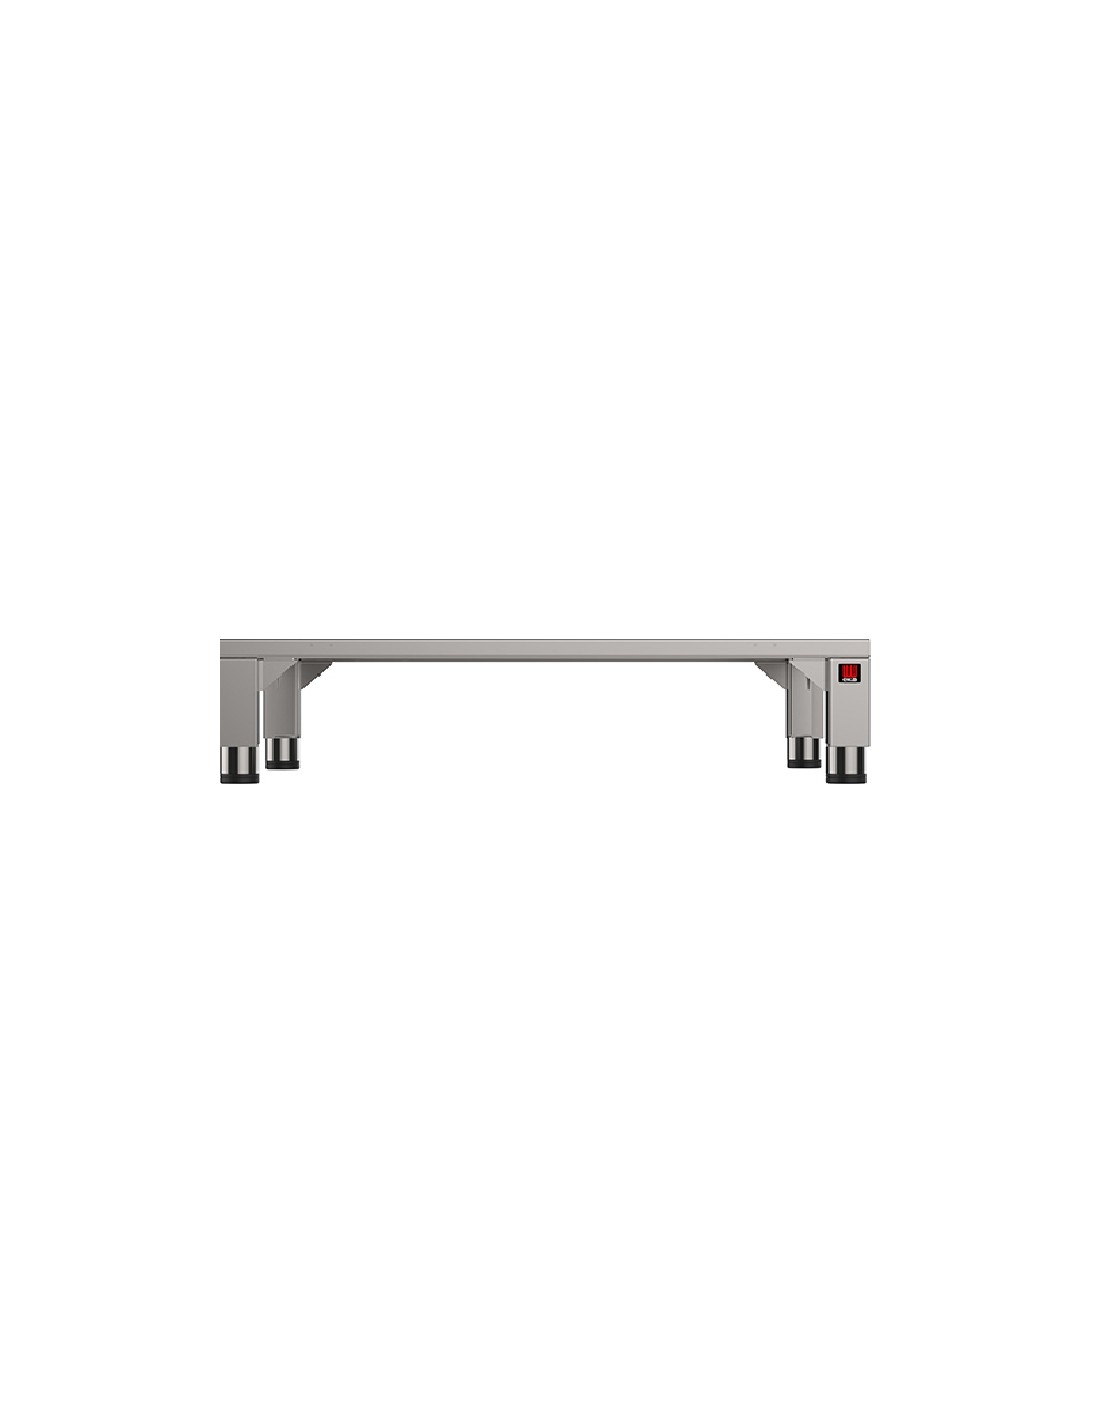 Fixed table - Acciaio inox AISI 430 - For ovens 4/6/10 trays - For overlapping furnaces - Dimensions cm 85 x 78.7 x22h